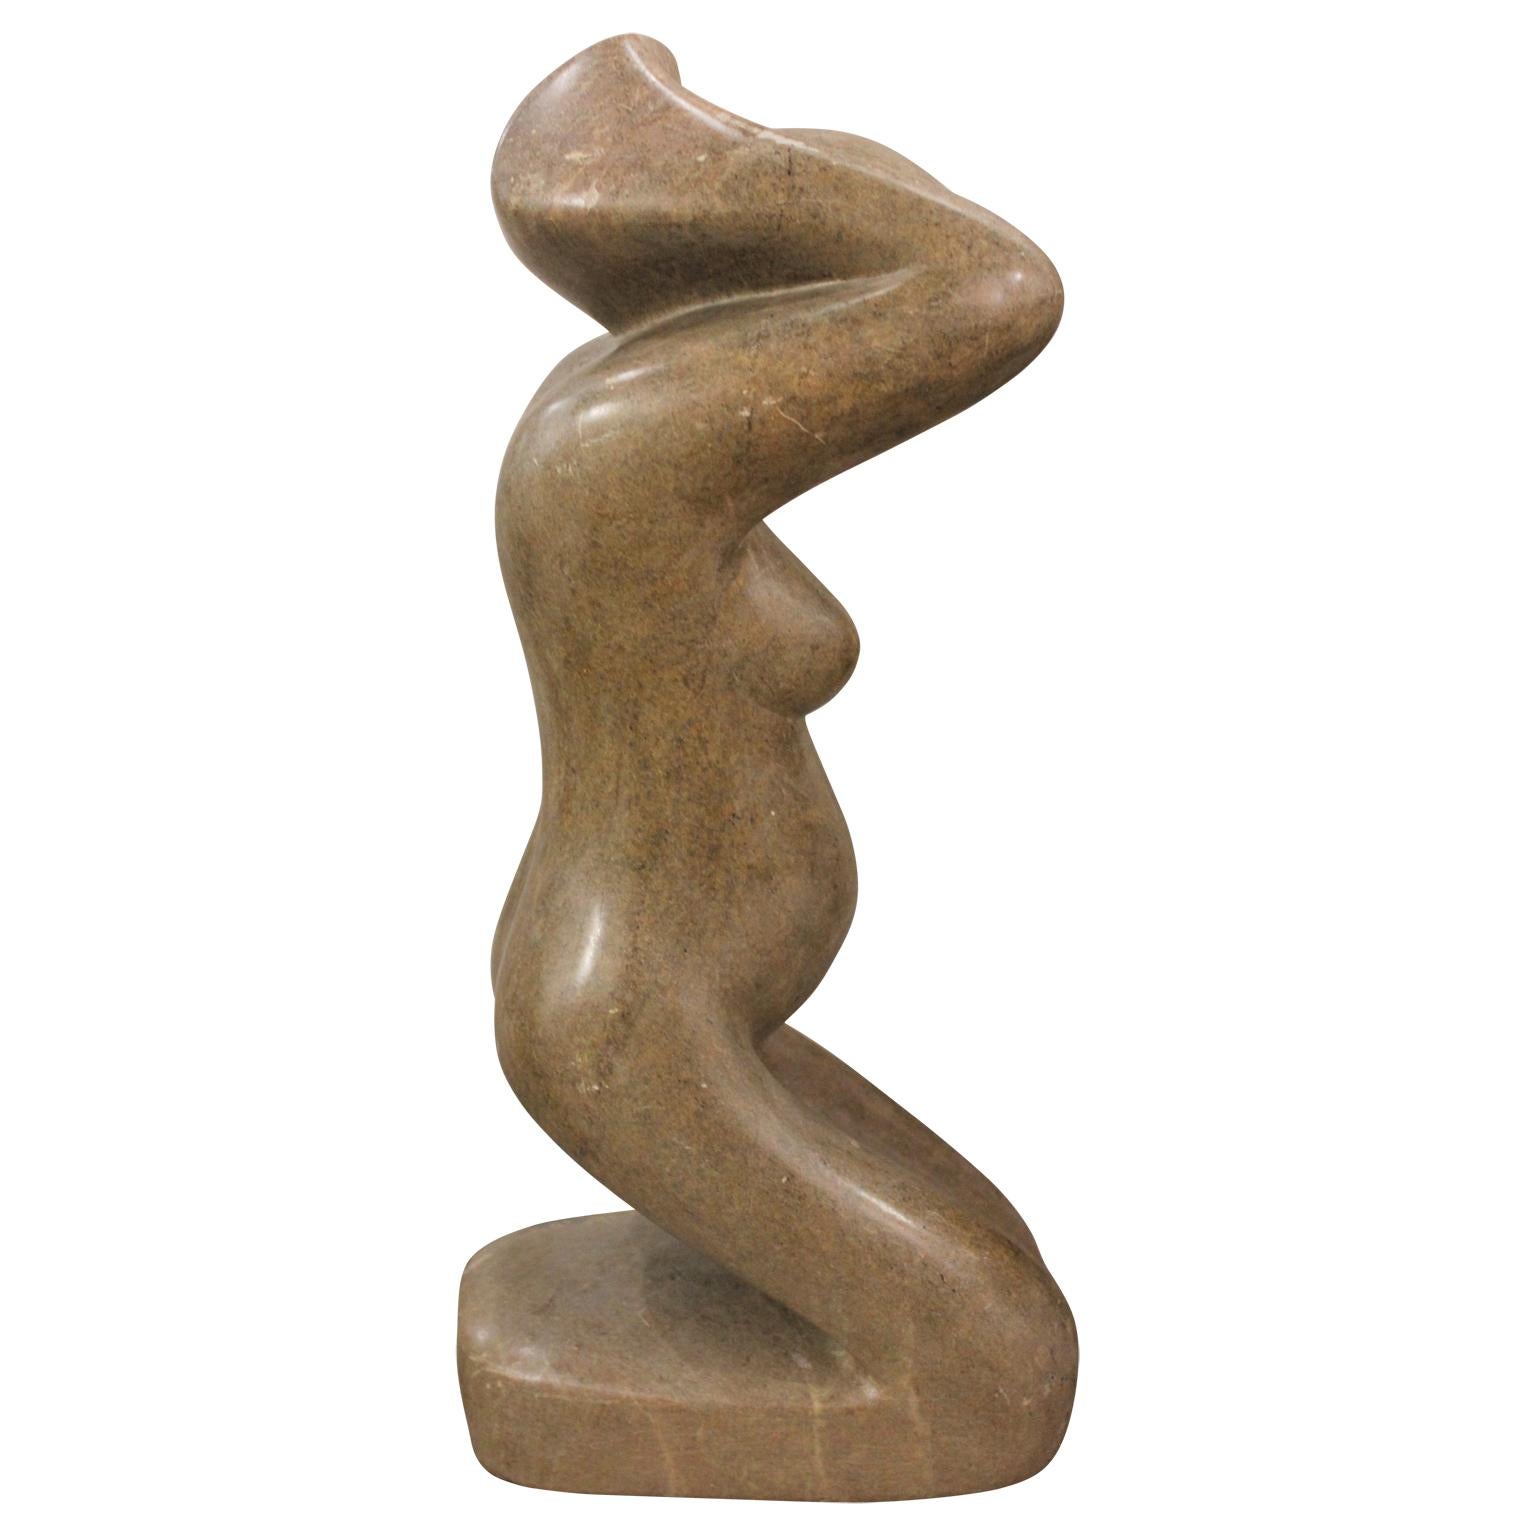 Seated Figure of a Women Stone Abstract Sculpture 